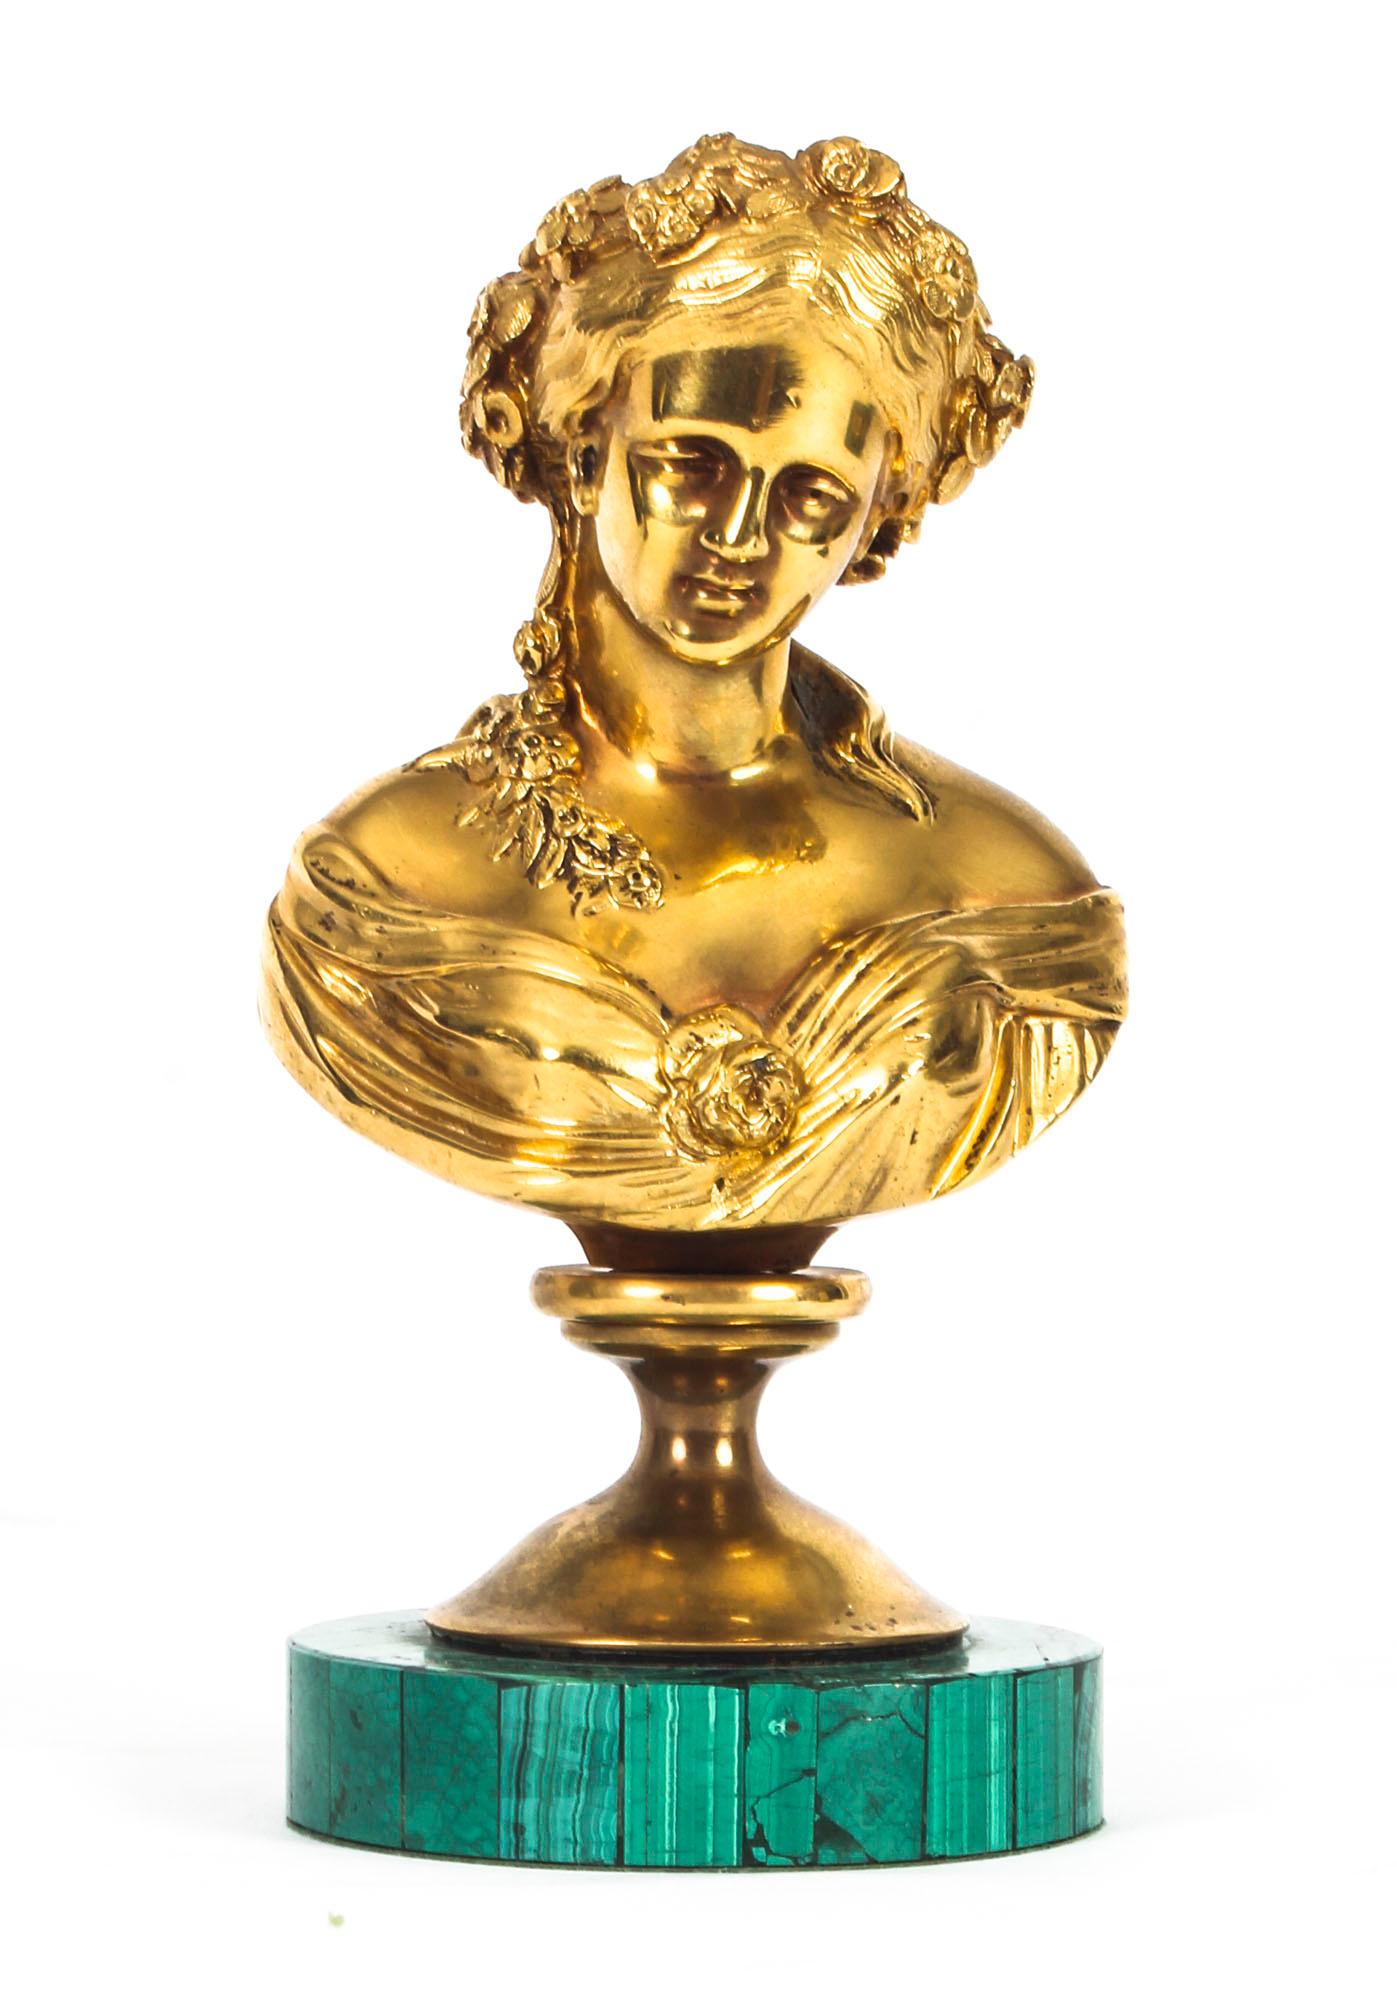 This is a wonderful antique French ormolu and malachite mounted portrait bust of a young maiden, circa 1870 in date.
 
This finely cast ormolu bust features a young maiden dressed in classic attire, her hair is tied with flowers and she is gazing